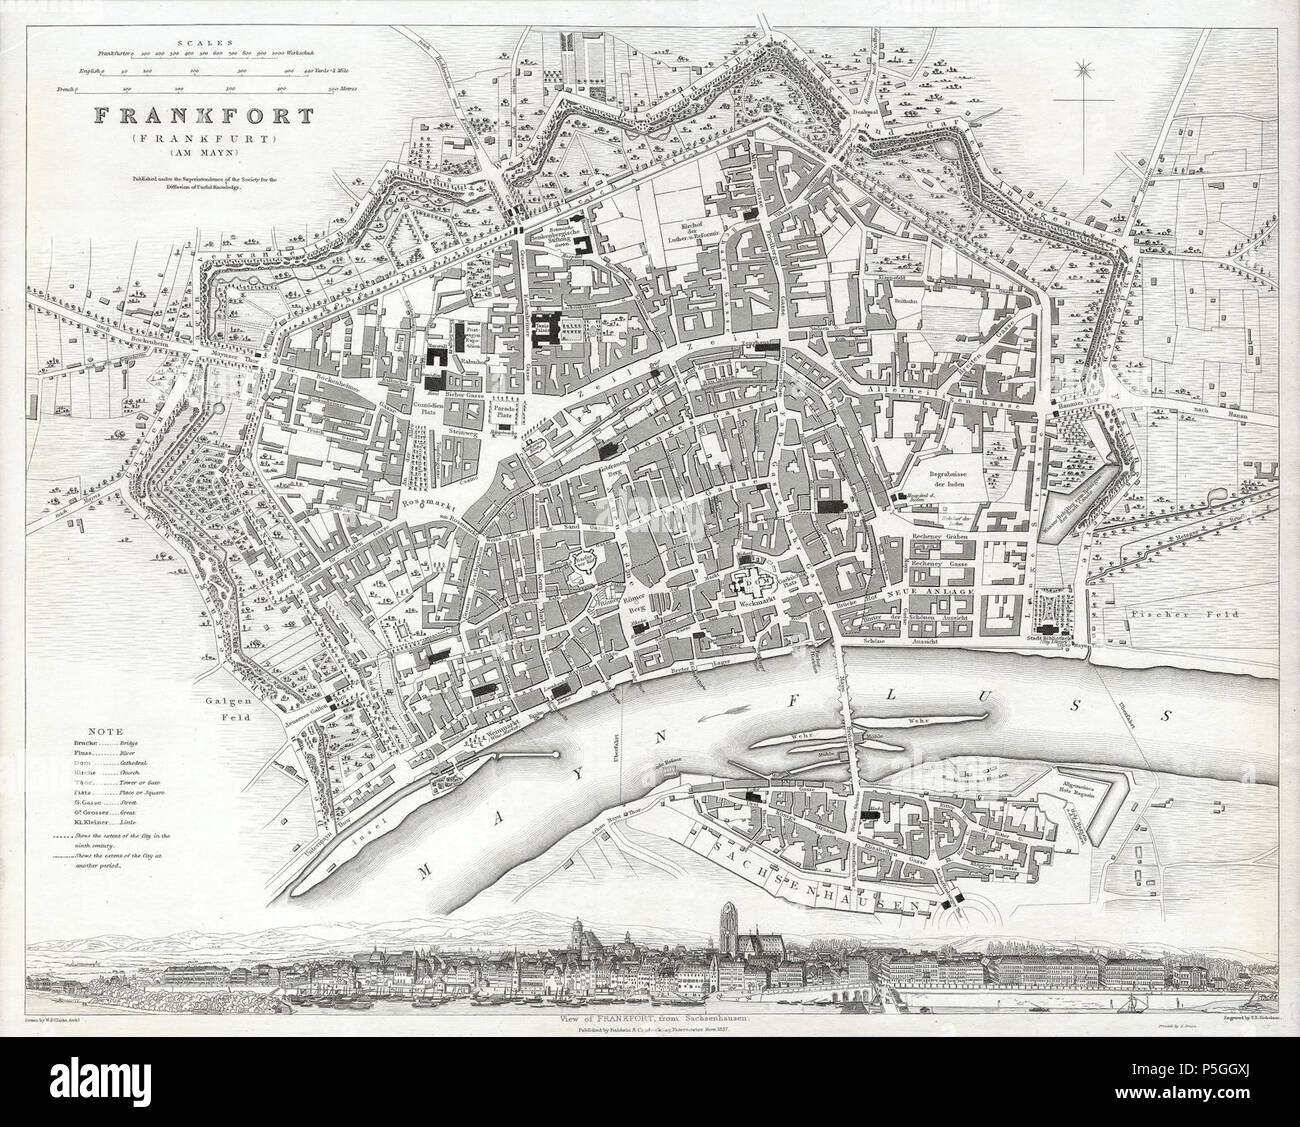 1837 S.D.U.K. City Map or Plan of Frankfort, Germany - Geographicus - Frankfurt-SDUK-1837. Stock Photo